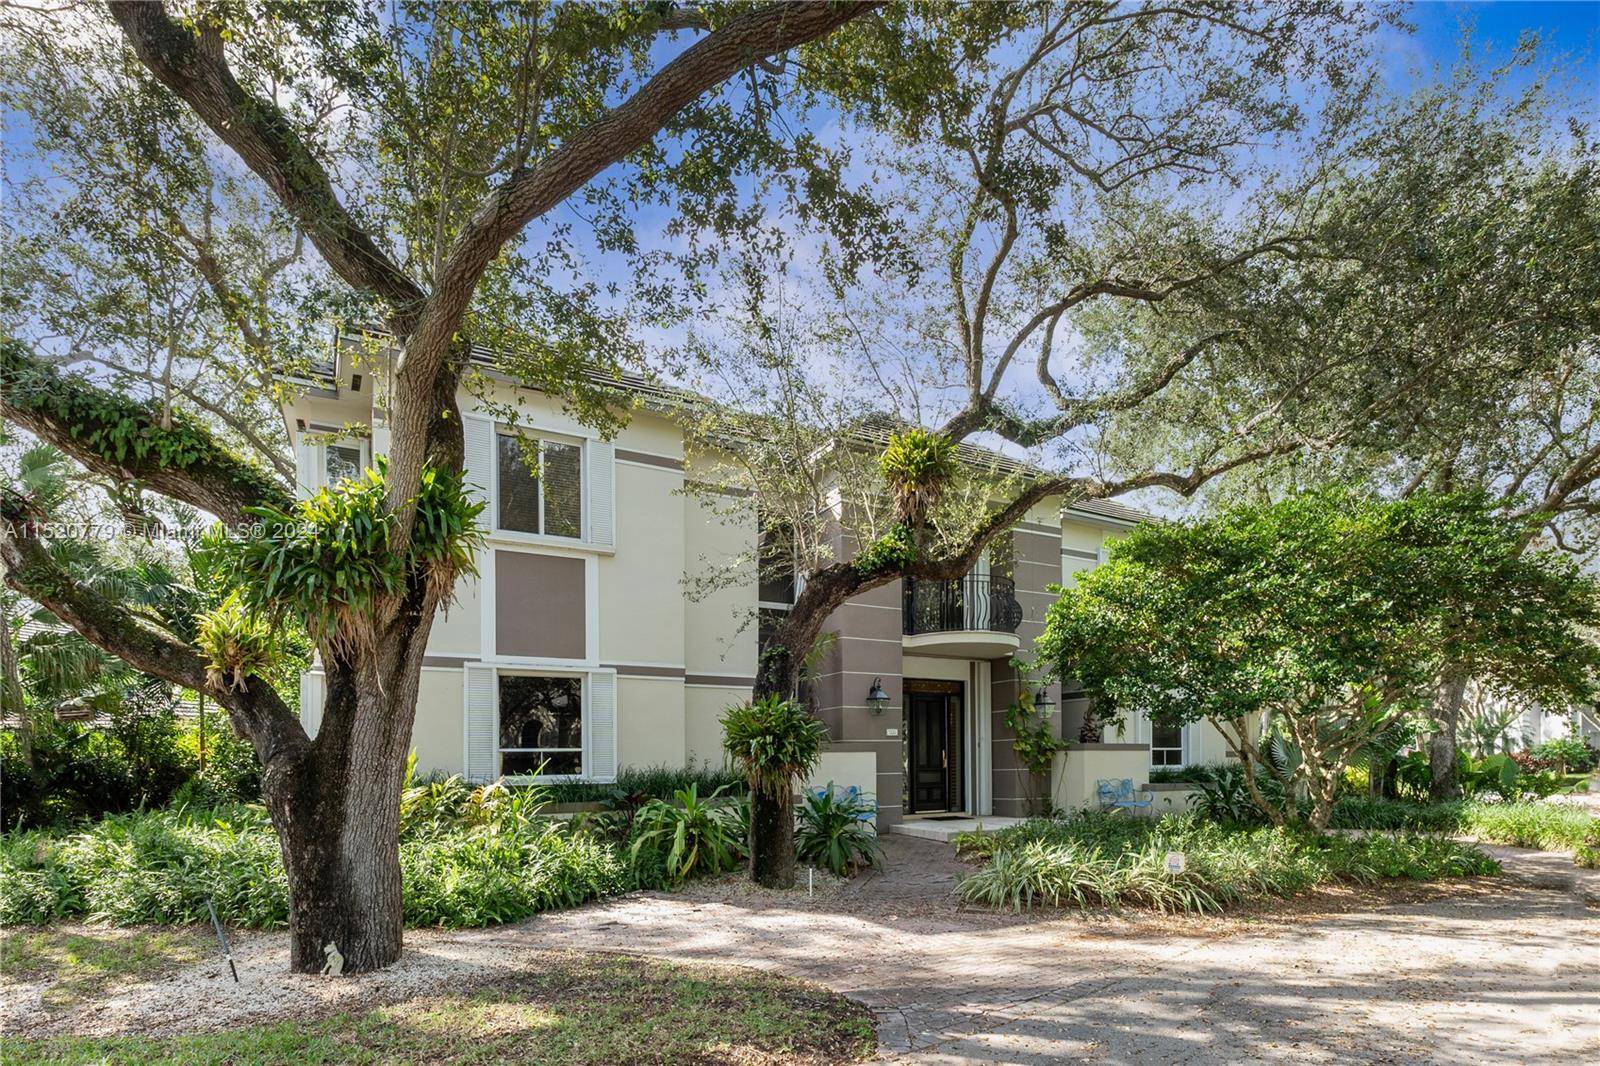 This French style transitional executive home located in the private, gated community of exclusive Cutler Oaks with 24 residences.